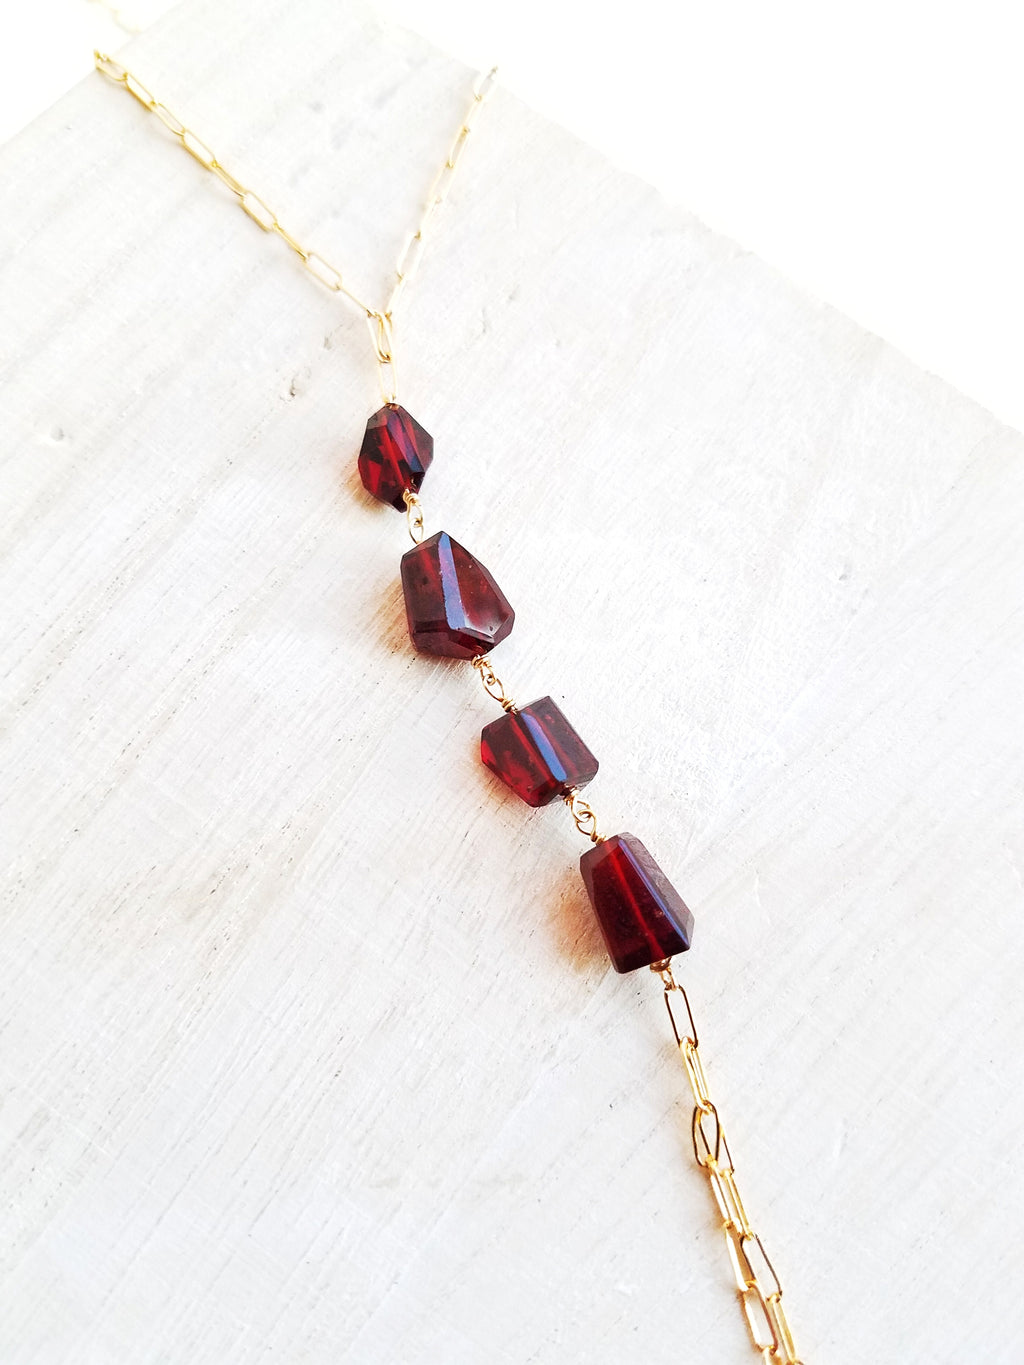 Garnet lariat necklace, gold filled, rectangle shape specialty chain